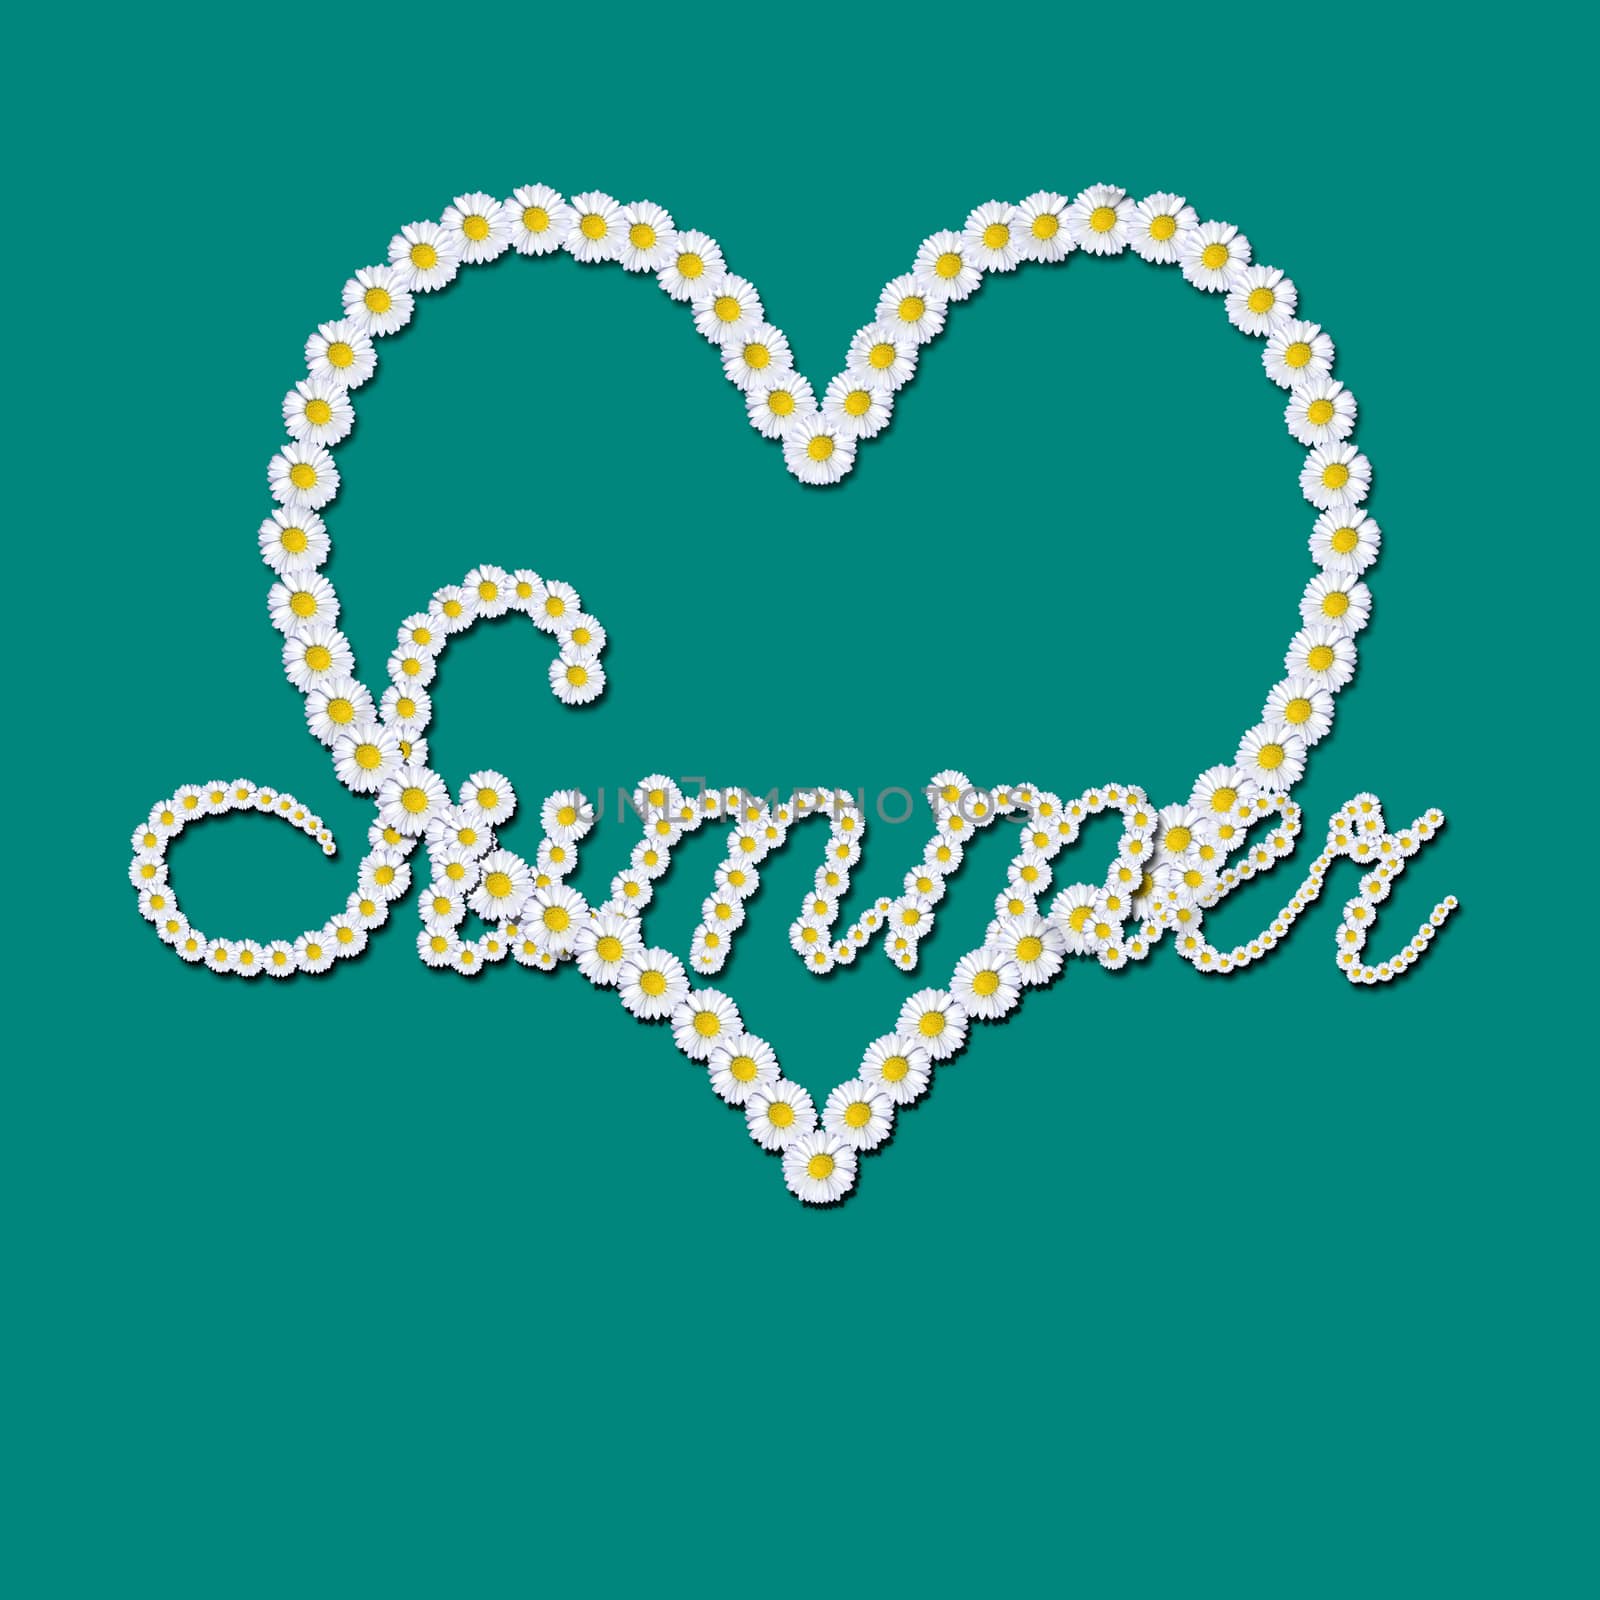 Summer love card by Carche